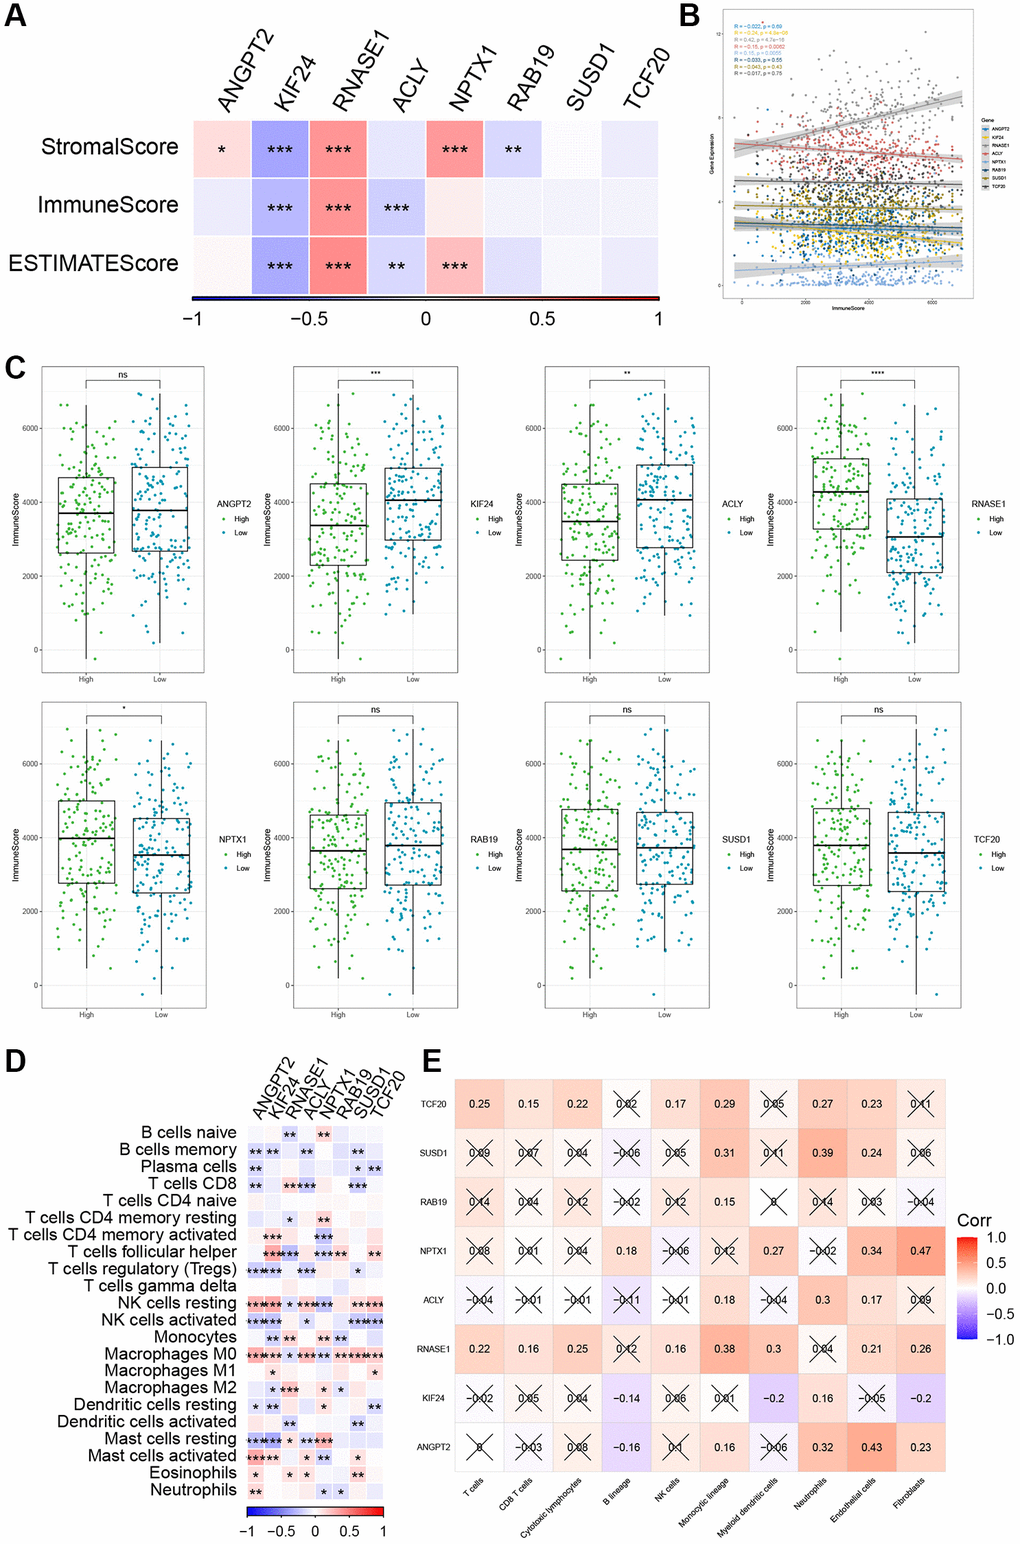 The relationship between the risk genes and immune landscape. (A, B) The correlation matrix of the risk genes and StromalScore, ImmuneScore, and ESTIMATEScore. (C) Comparison of high and low expression of 8 key genes and ImmuneScore. (D) Correlation between 8 key genes and immune cell score predicted by CIBERSORT analysis. (E) Correlation between 8 key genes and 10 immune cell types predicted by MCPcounter analysis. *P **P ***P ****P 